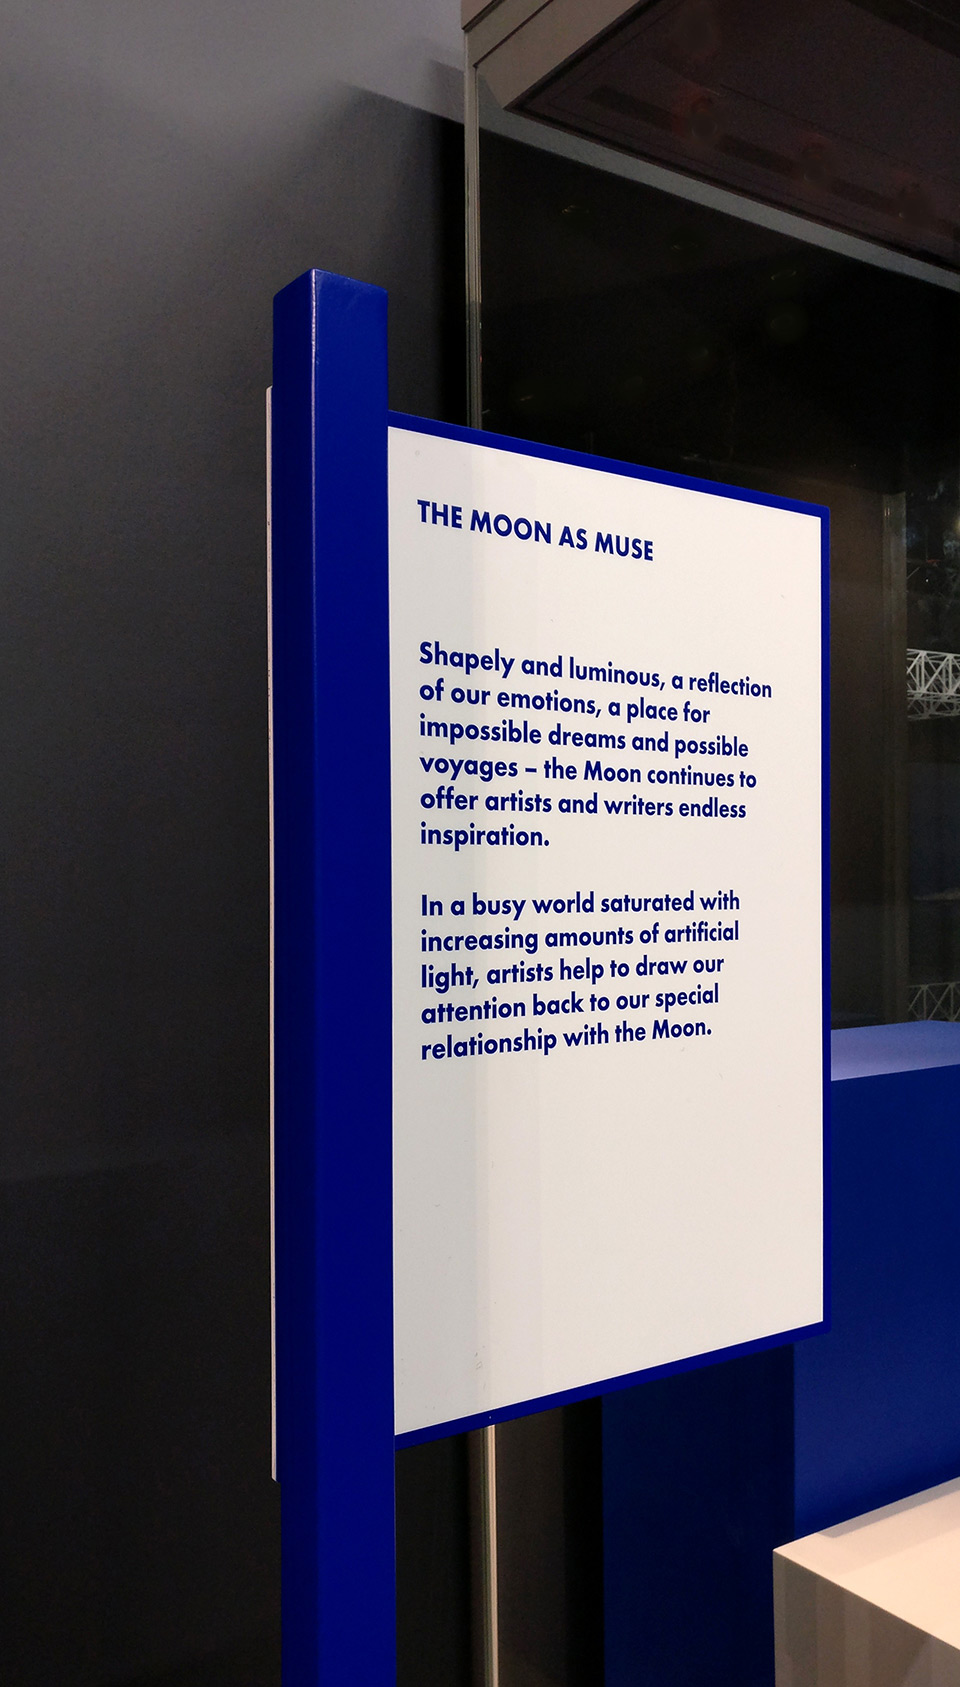 The Moon at the National Maritime Museum - 2D exhibition design by Irish Butcher